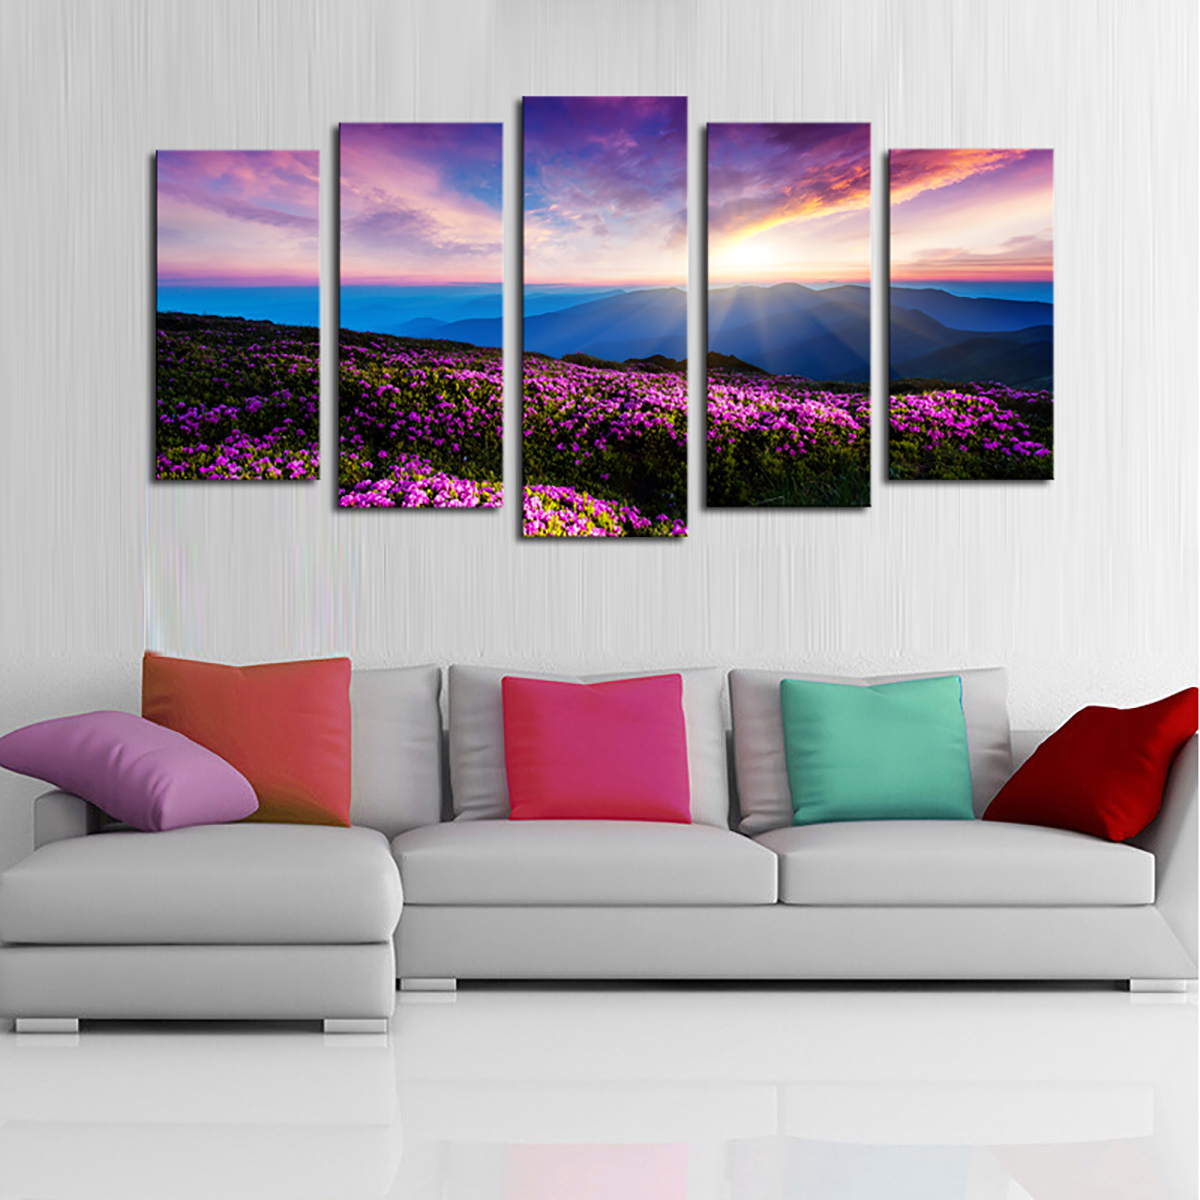 5Pcs-Canvas-Print-Paintings-Scenery-Oil-Painting-Wall-Decorative-Printing-Art-Picture-Frameless-Home-1758668-4